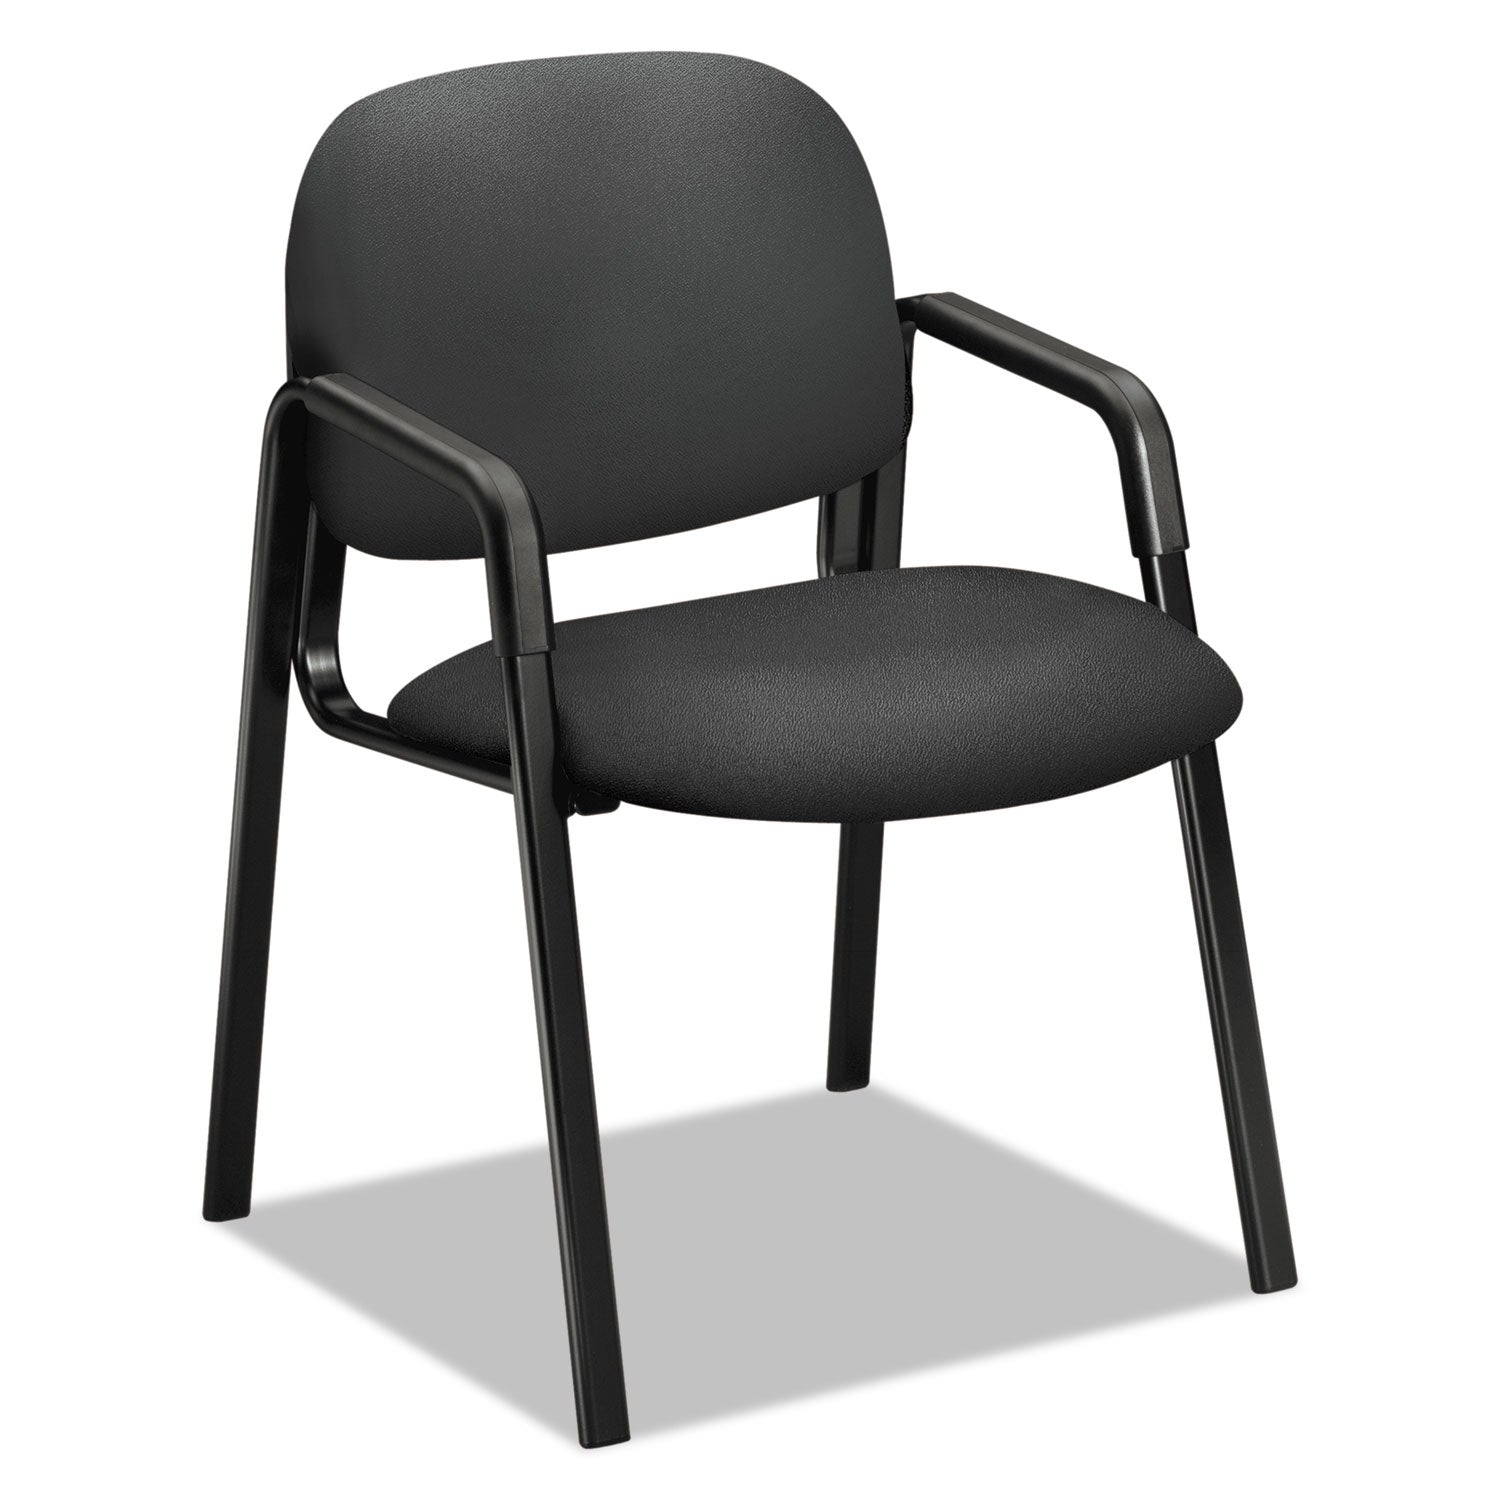 solutions-seating-4000-series-leg-base-guest-chair-fabric-upholstery-235-x-245-x-32-iron-ore-seat-back-black-base_hon4003cu19t - 1